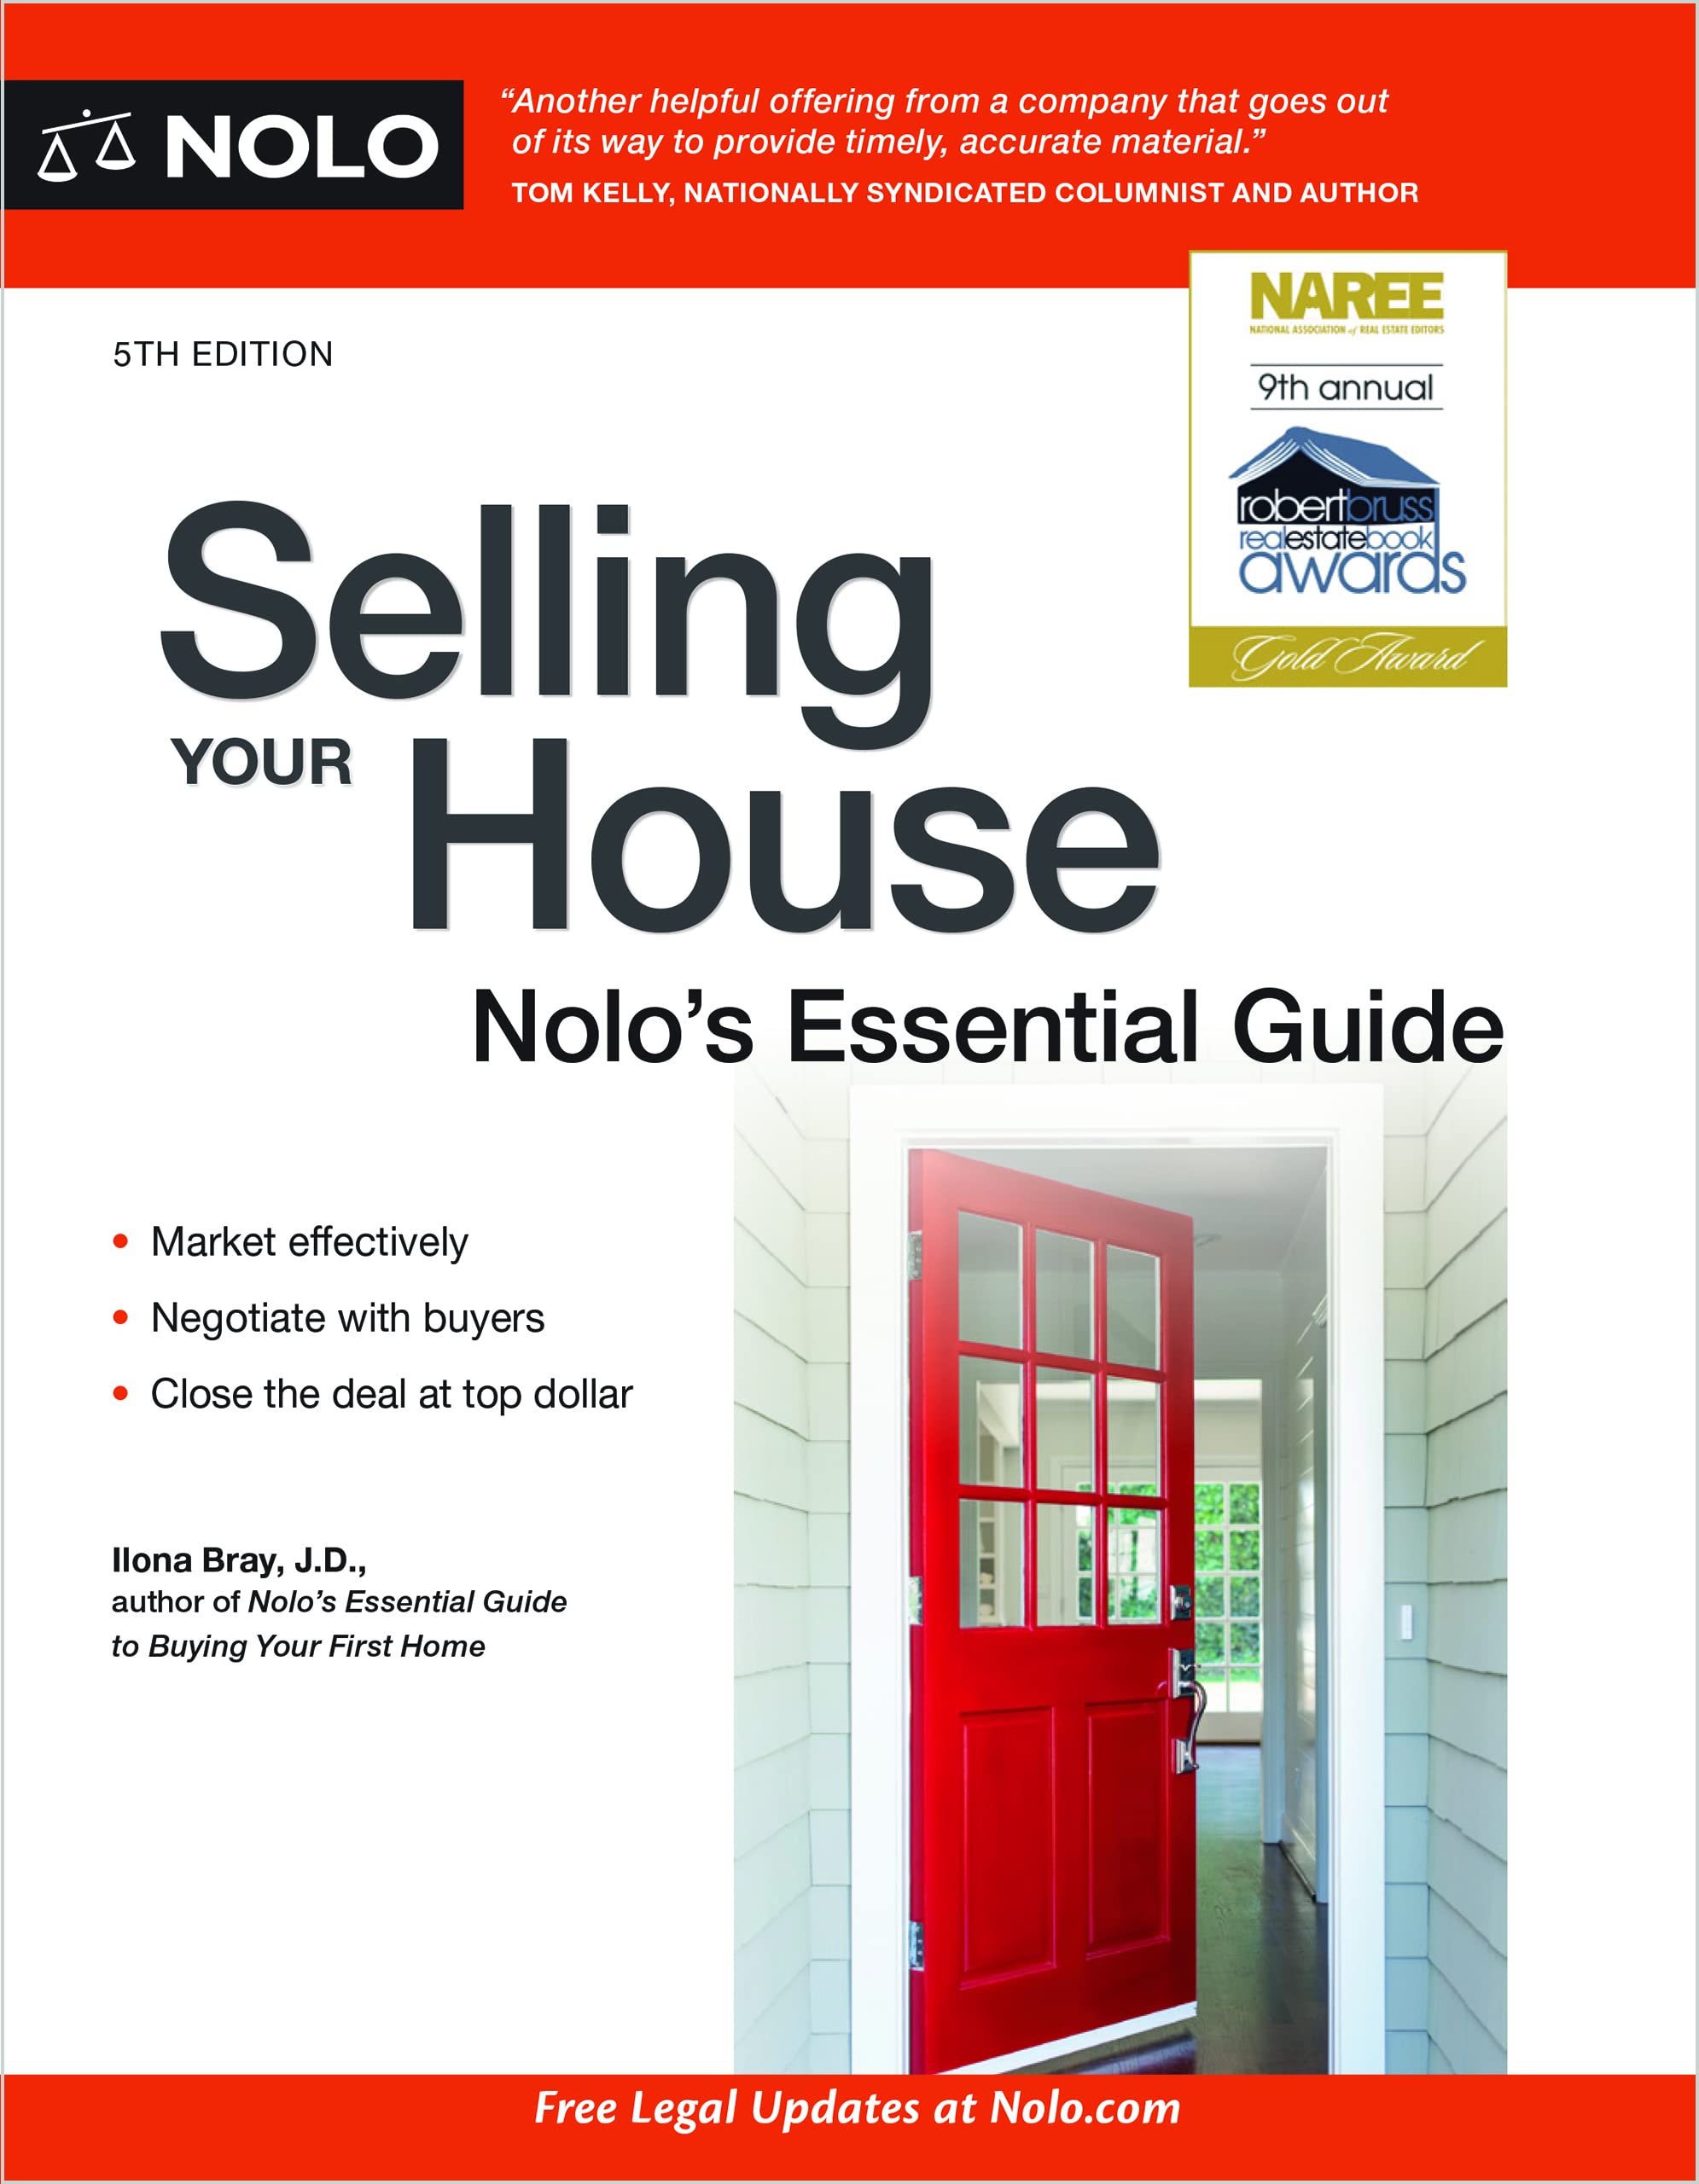 Selling Your House SureShot Books